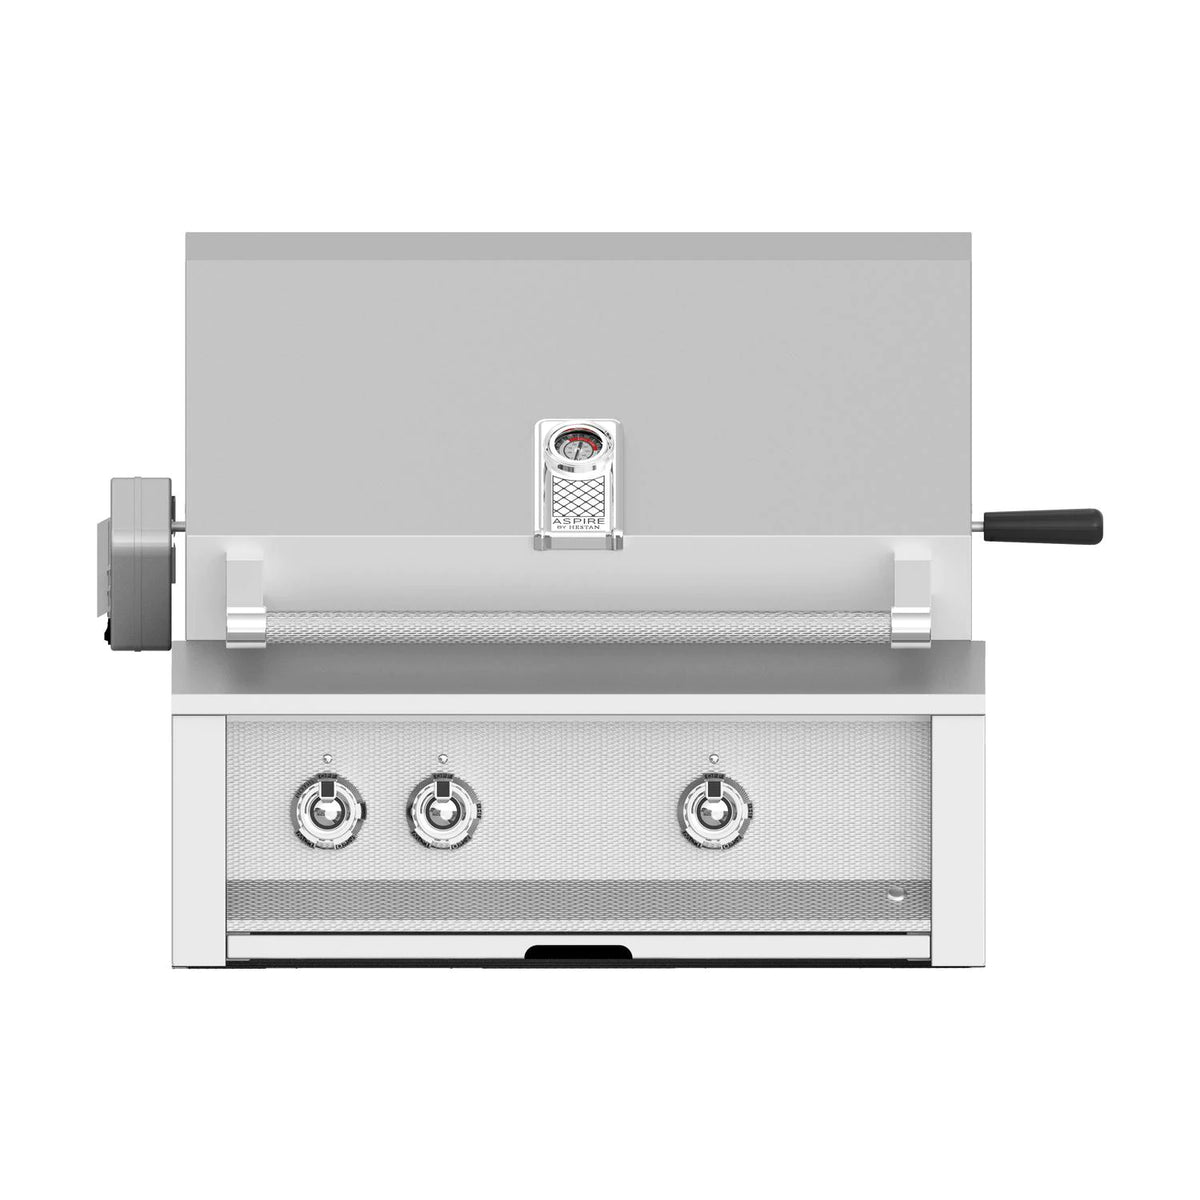 Aspire By Hestan 30-Inch Built-In Gas Grill with Rotisserie Front View